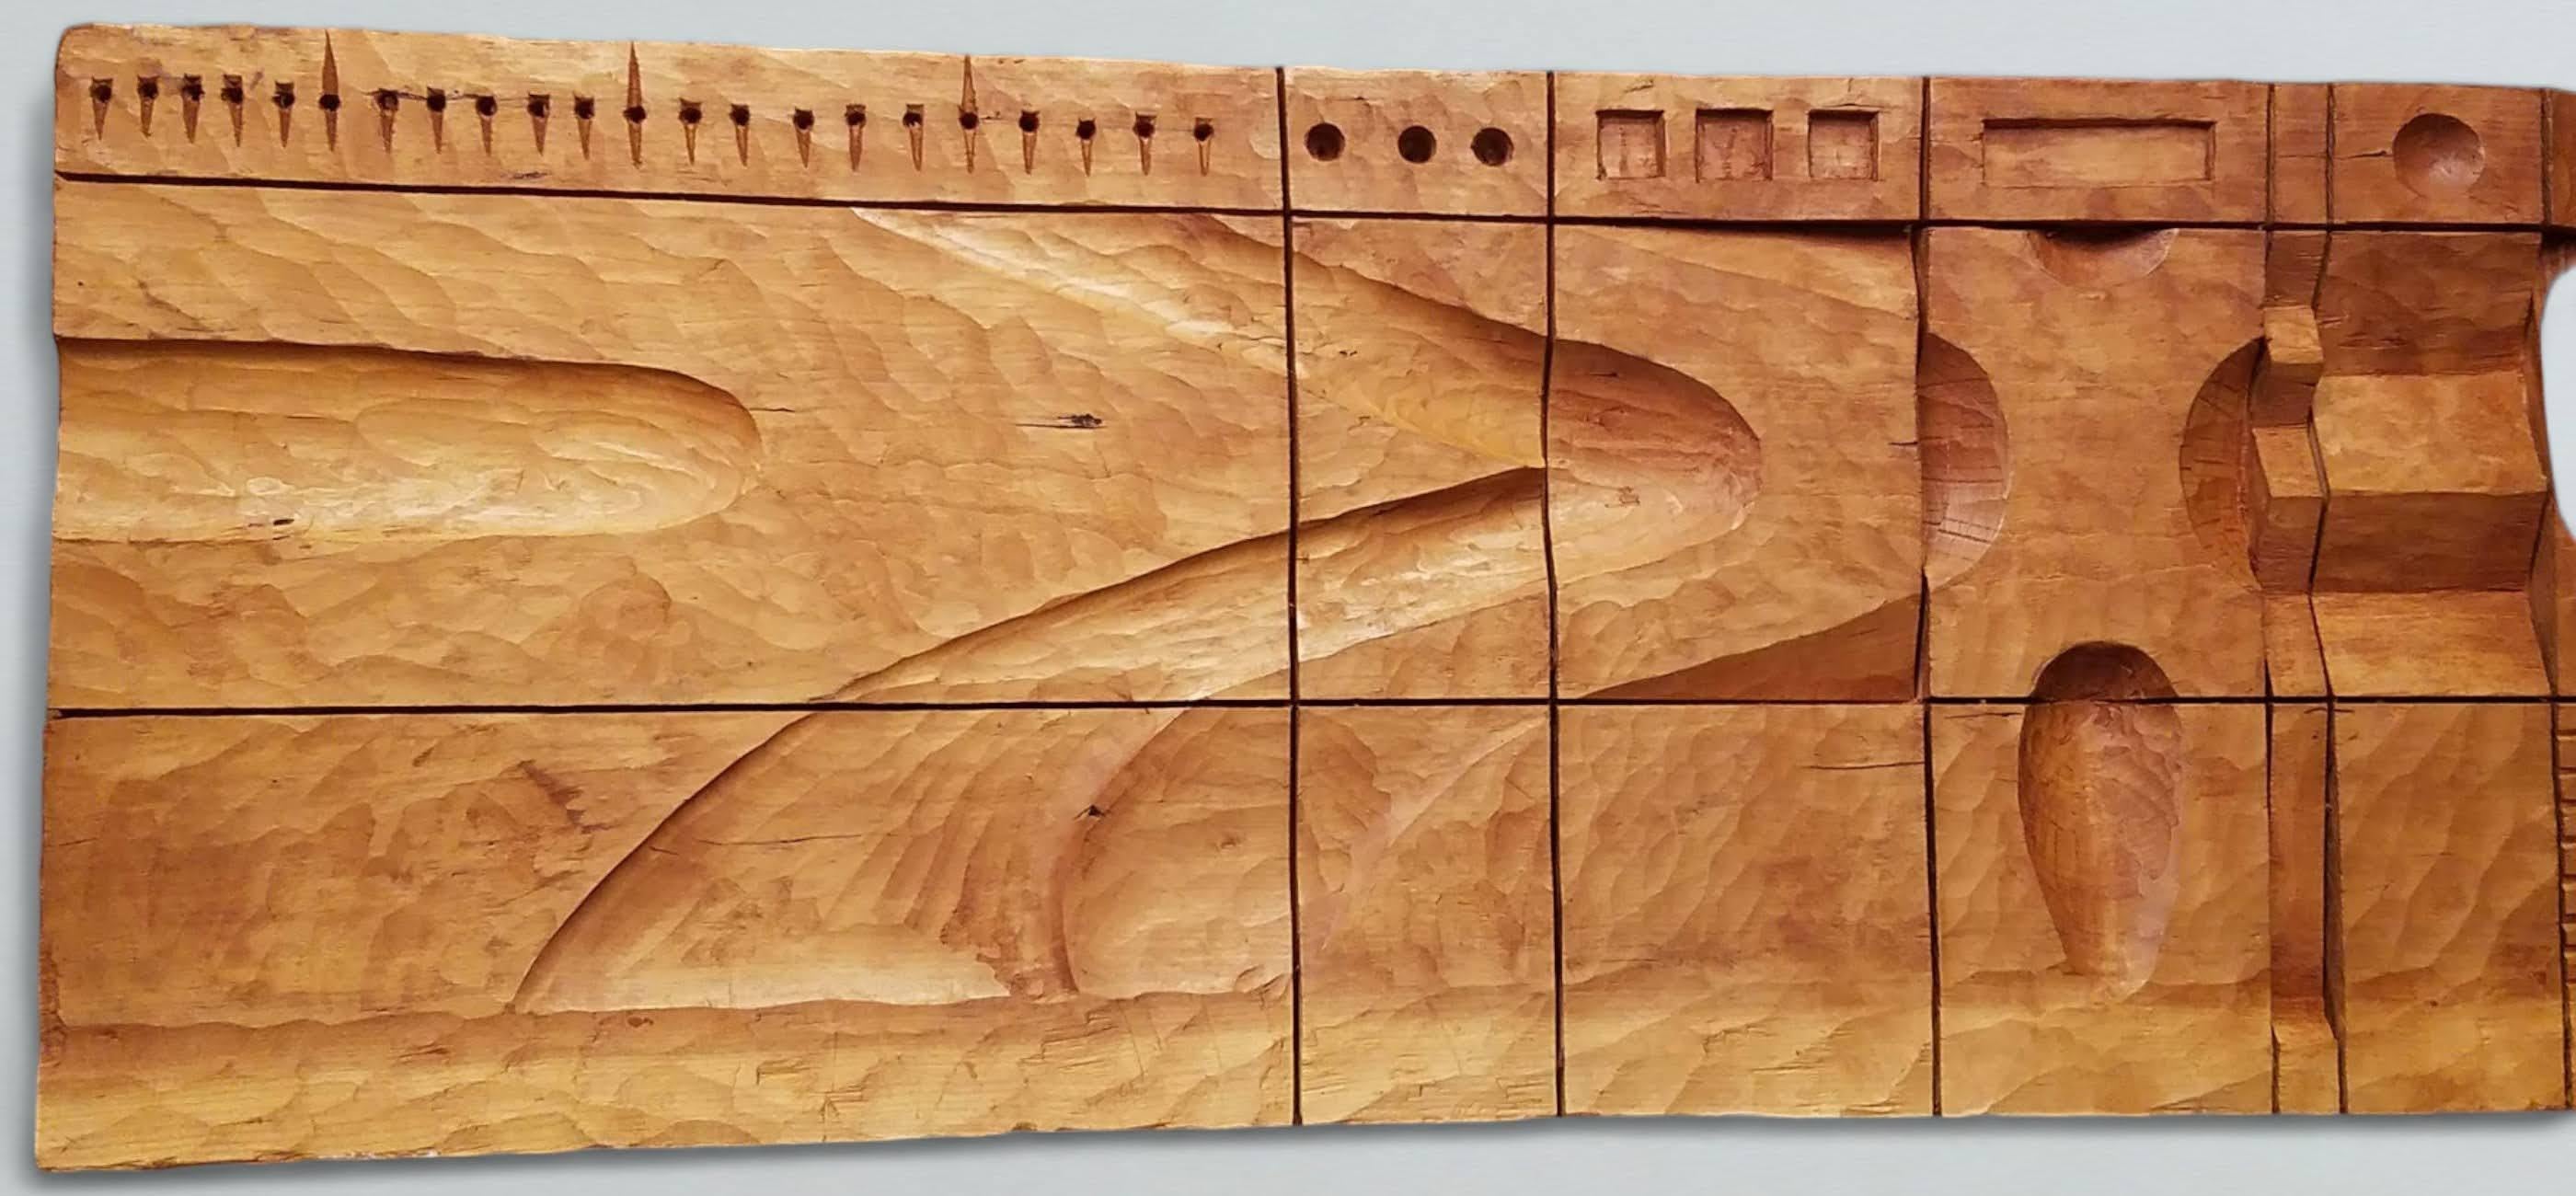 Leroy Setziol Carved Wall Sculpture 1963 For Sale 1